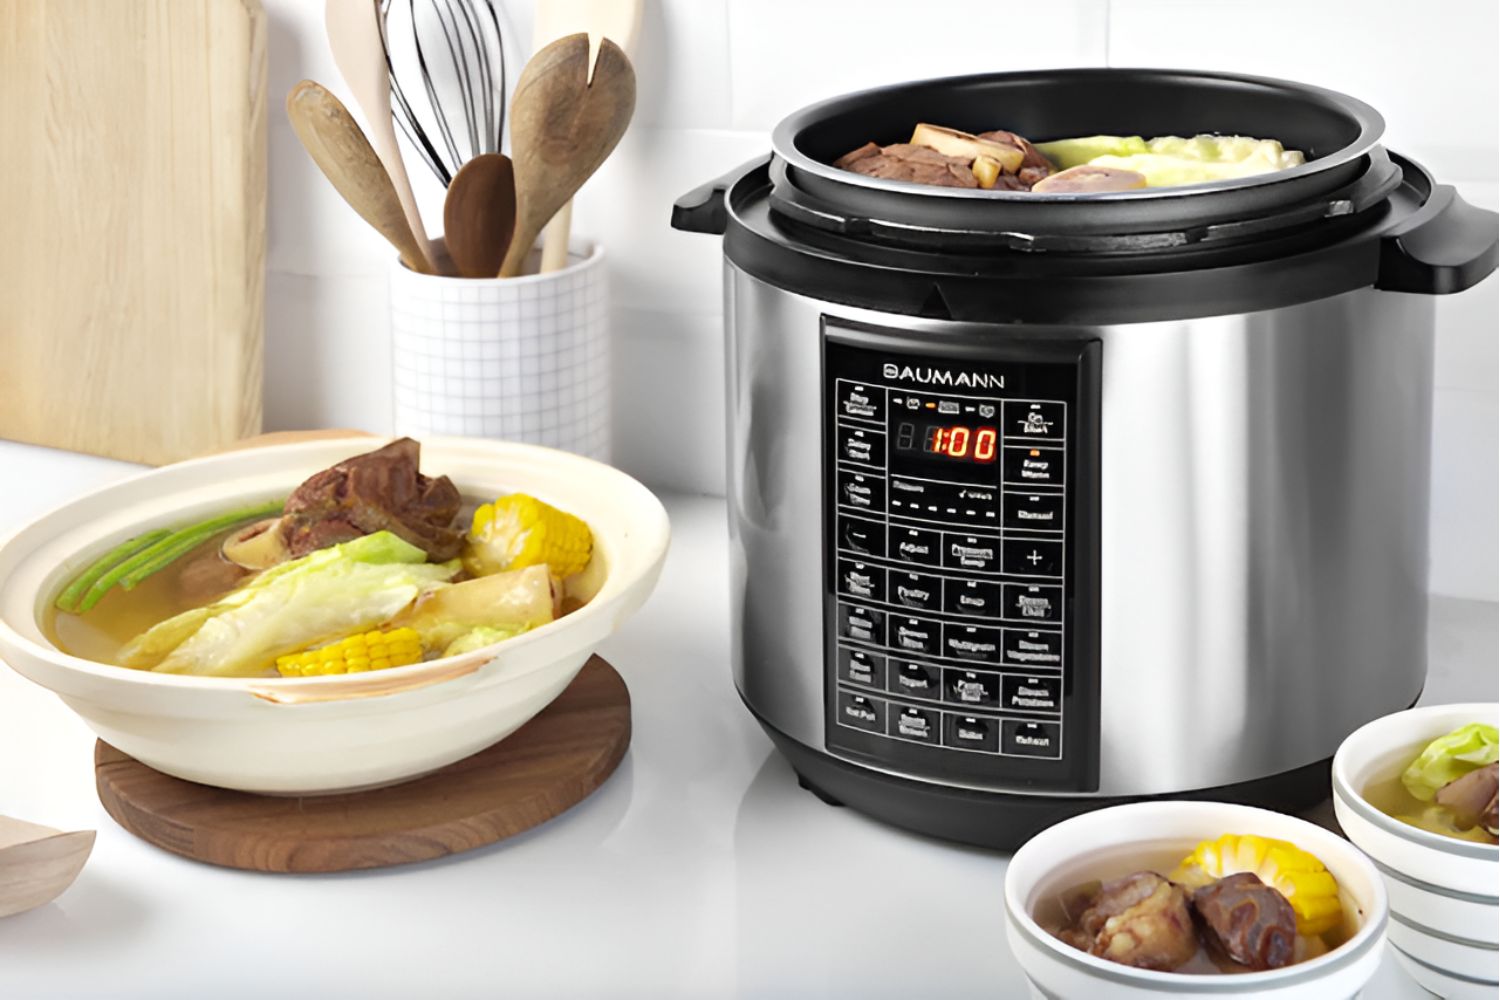 How Long To Cook Soup In An Electric Pressure Cooker